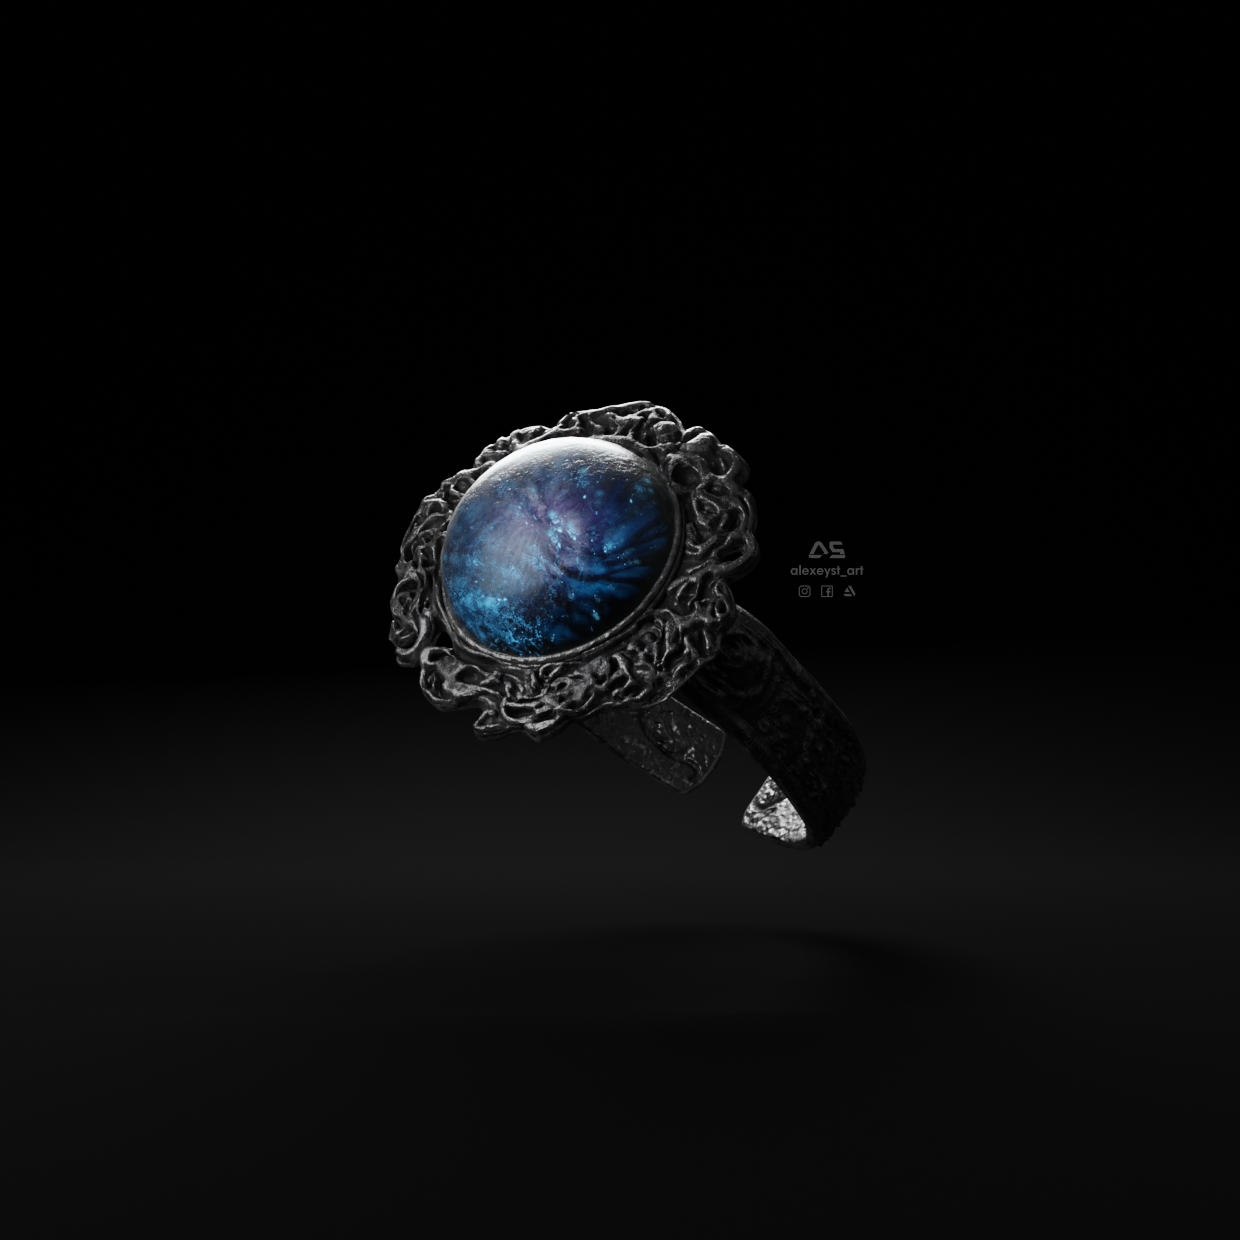 Ranni the Witch  Elden Ring - Finished Projects - Blender Artists Community